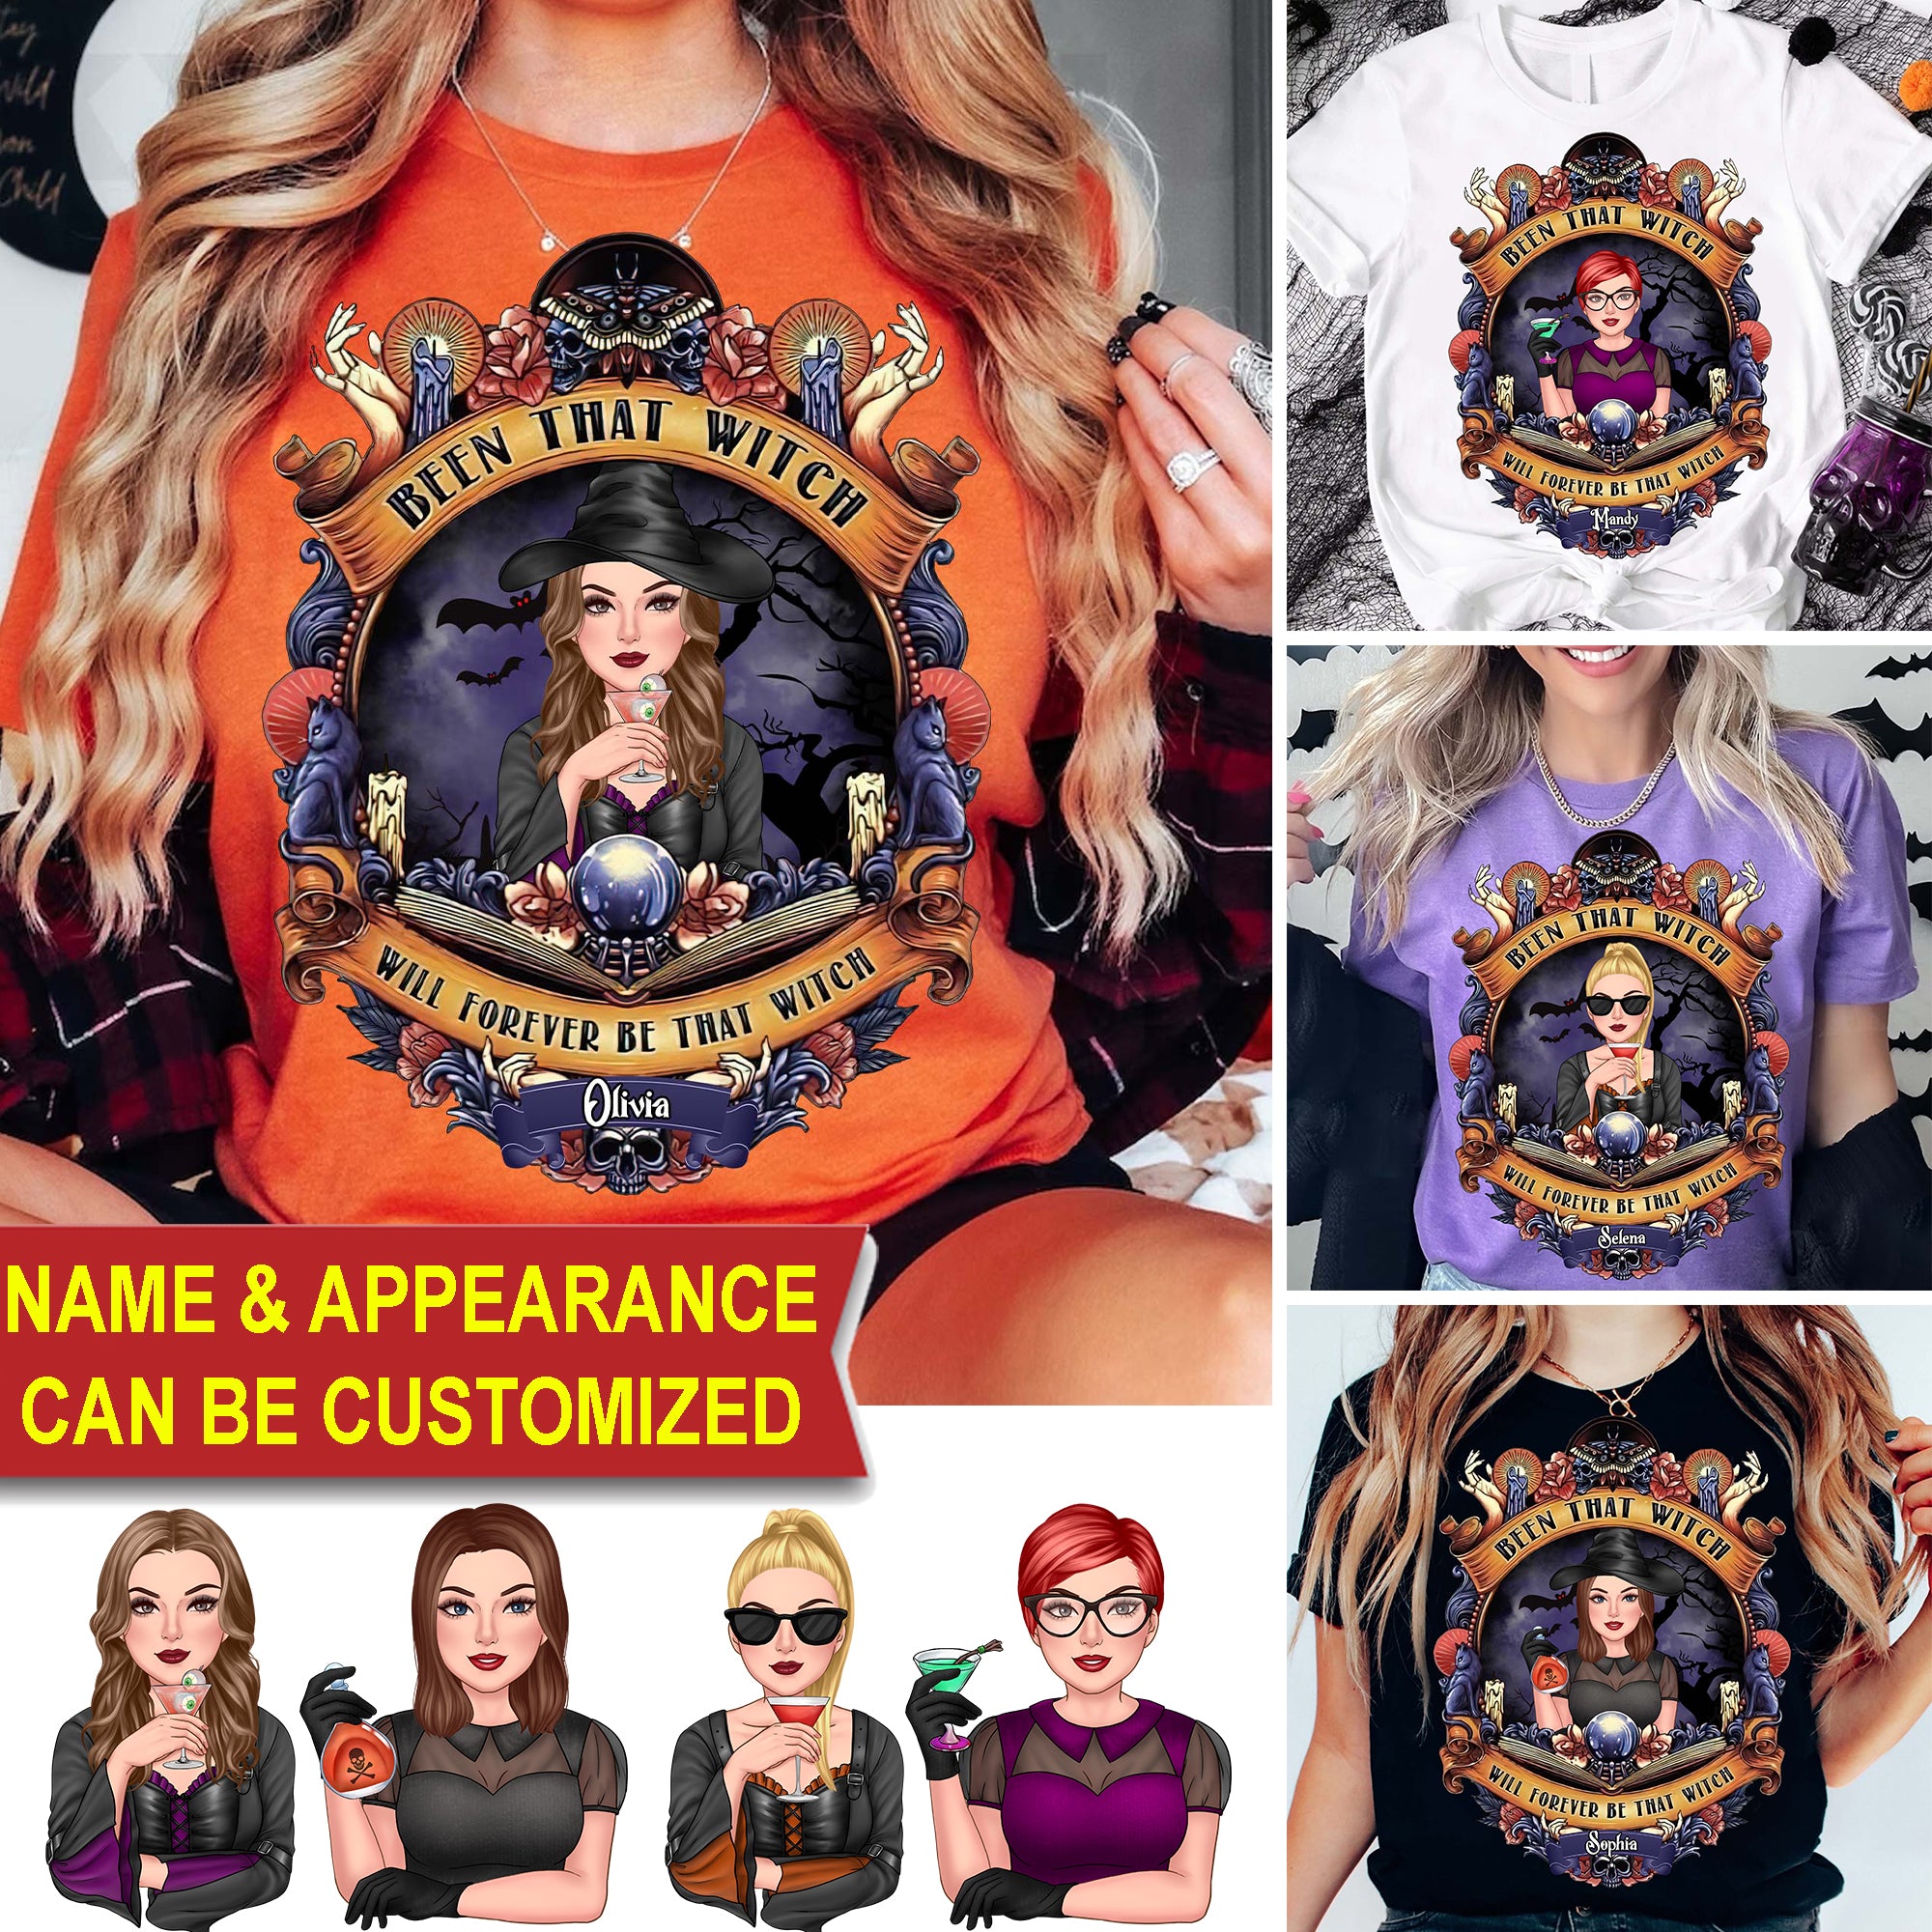 Been That Witch Will Forever Be That Witch - Custom Appearance & Name - Personalized T-Shirt - Halloween Family Gift